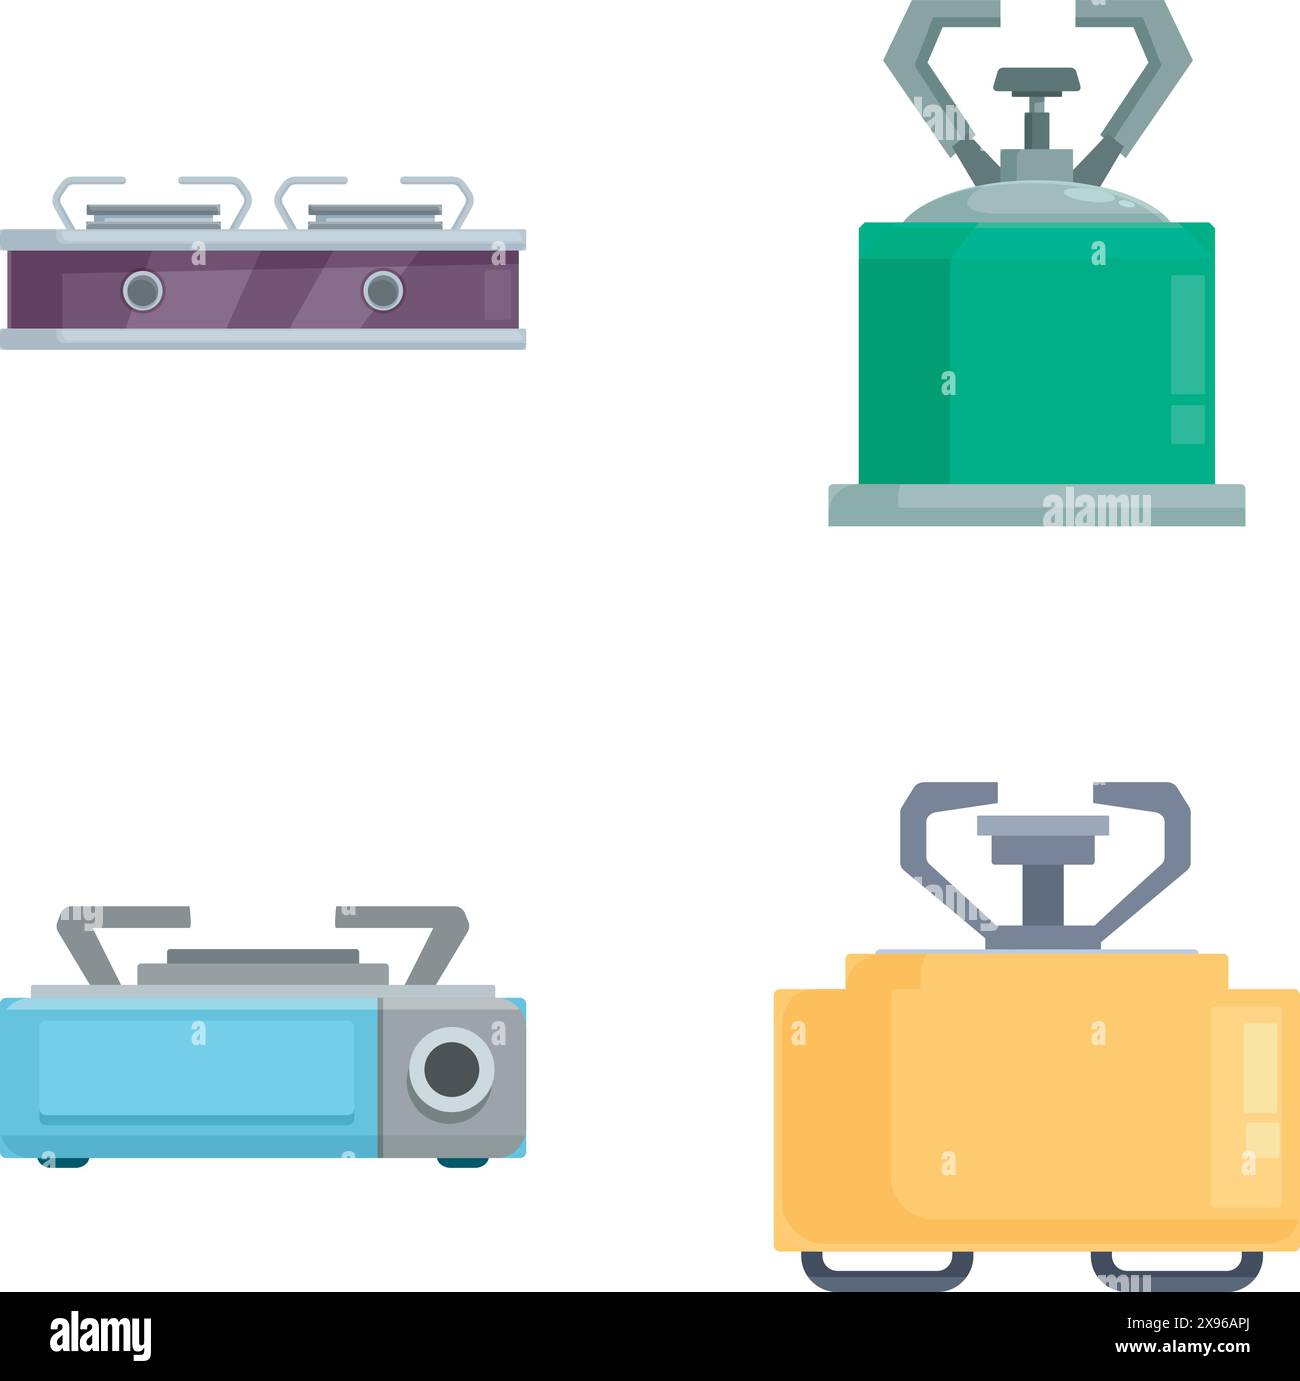 Collection of four flat design icons representing different models of portable camping stoves Stock Vector